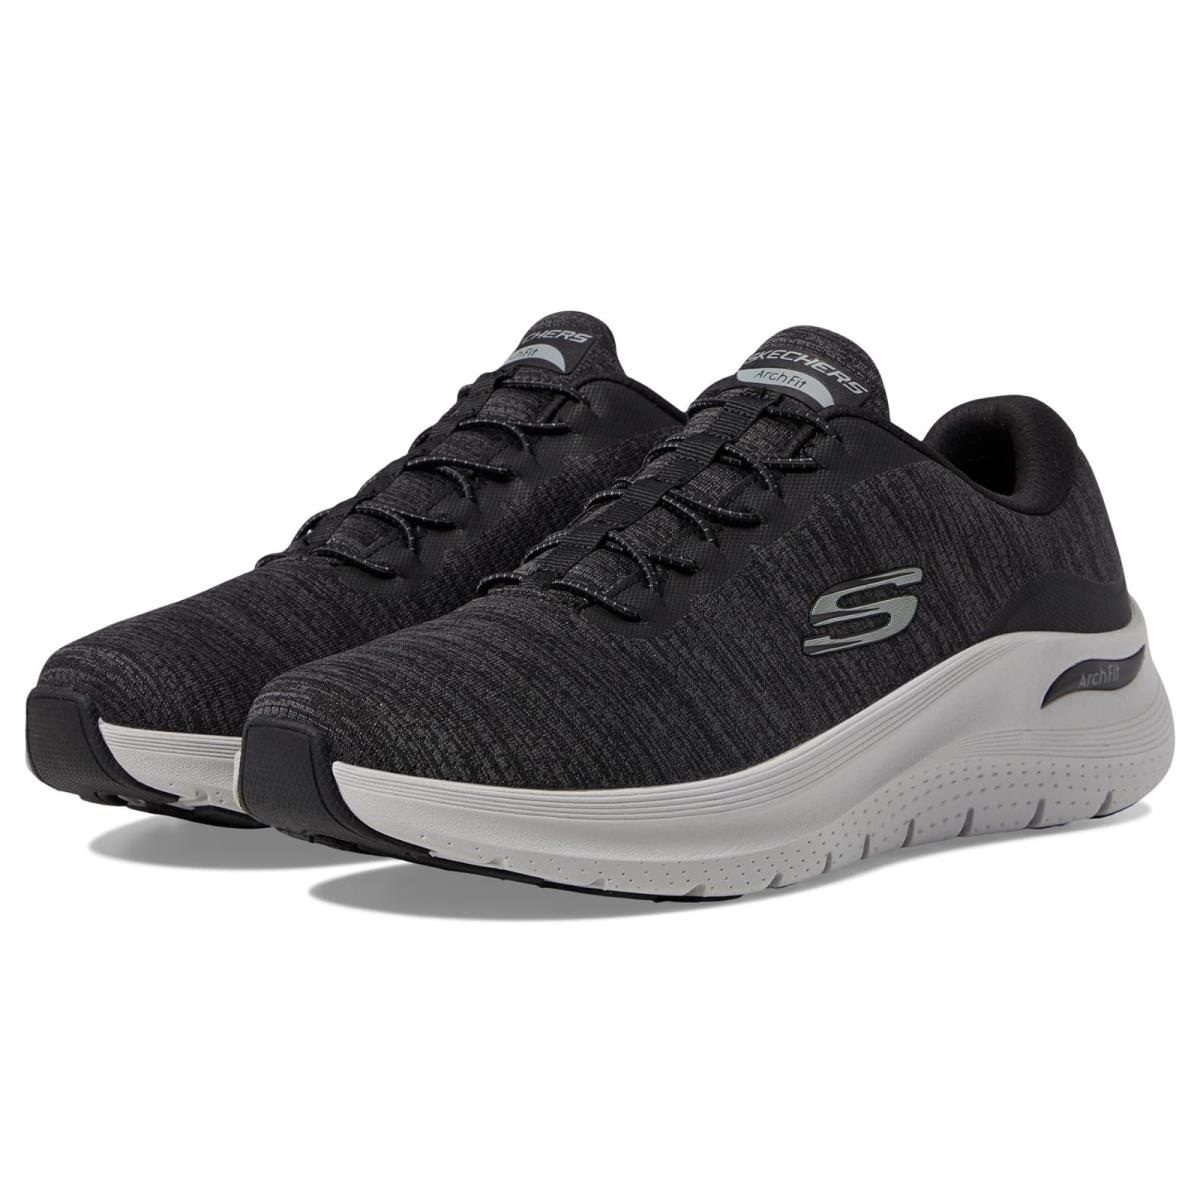 Man`s Sneakers Athletic Shoes Skechers Arch Fit 2.0 Upperhand Black/Gray